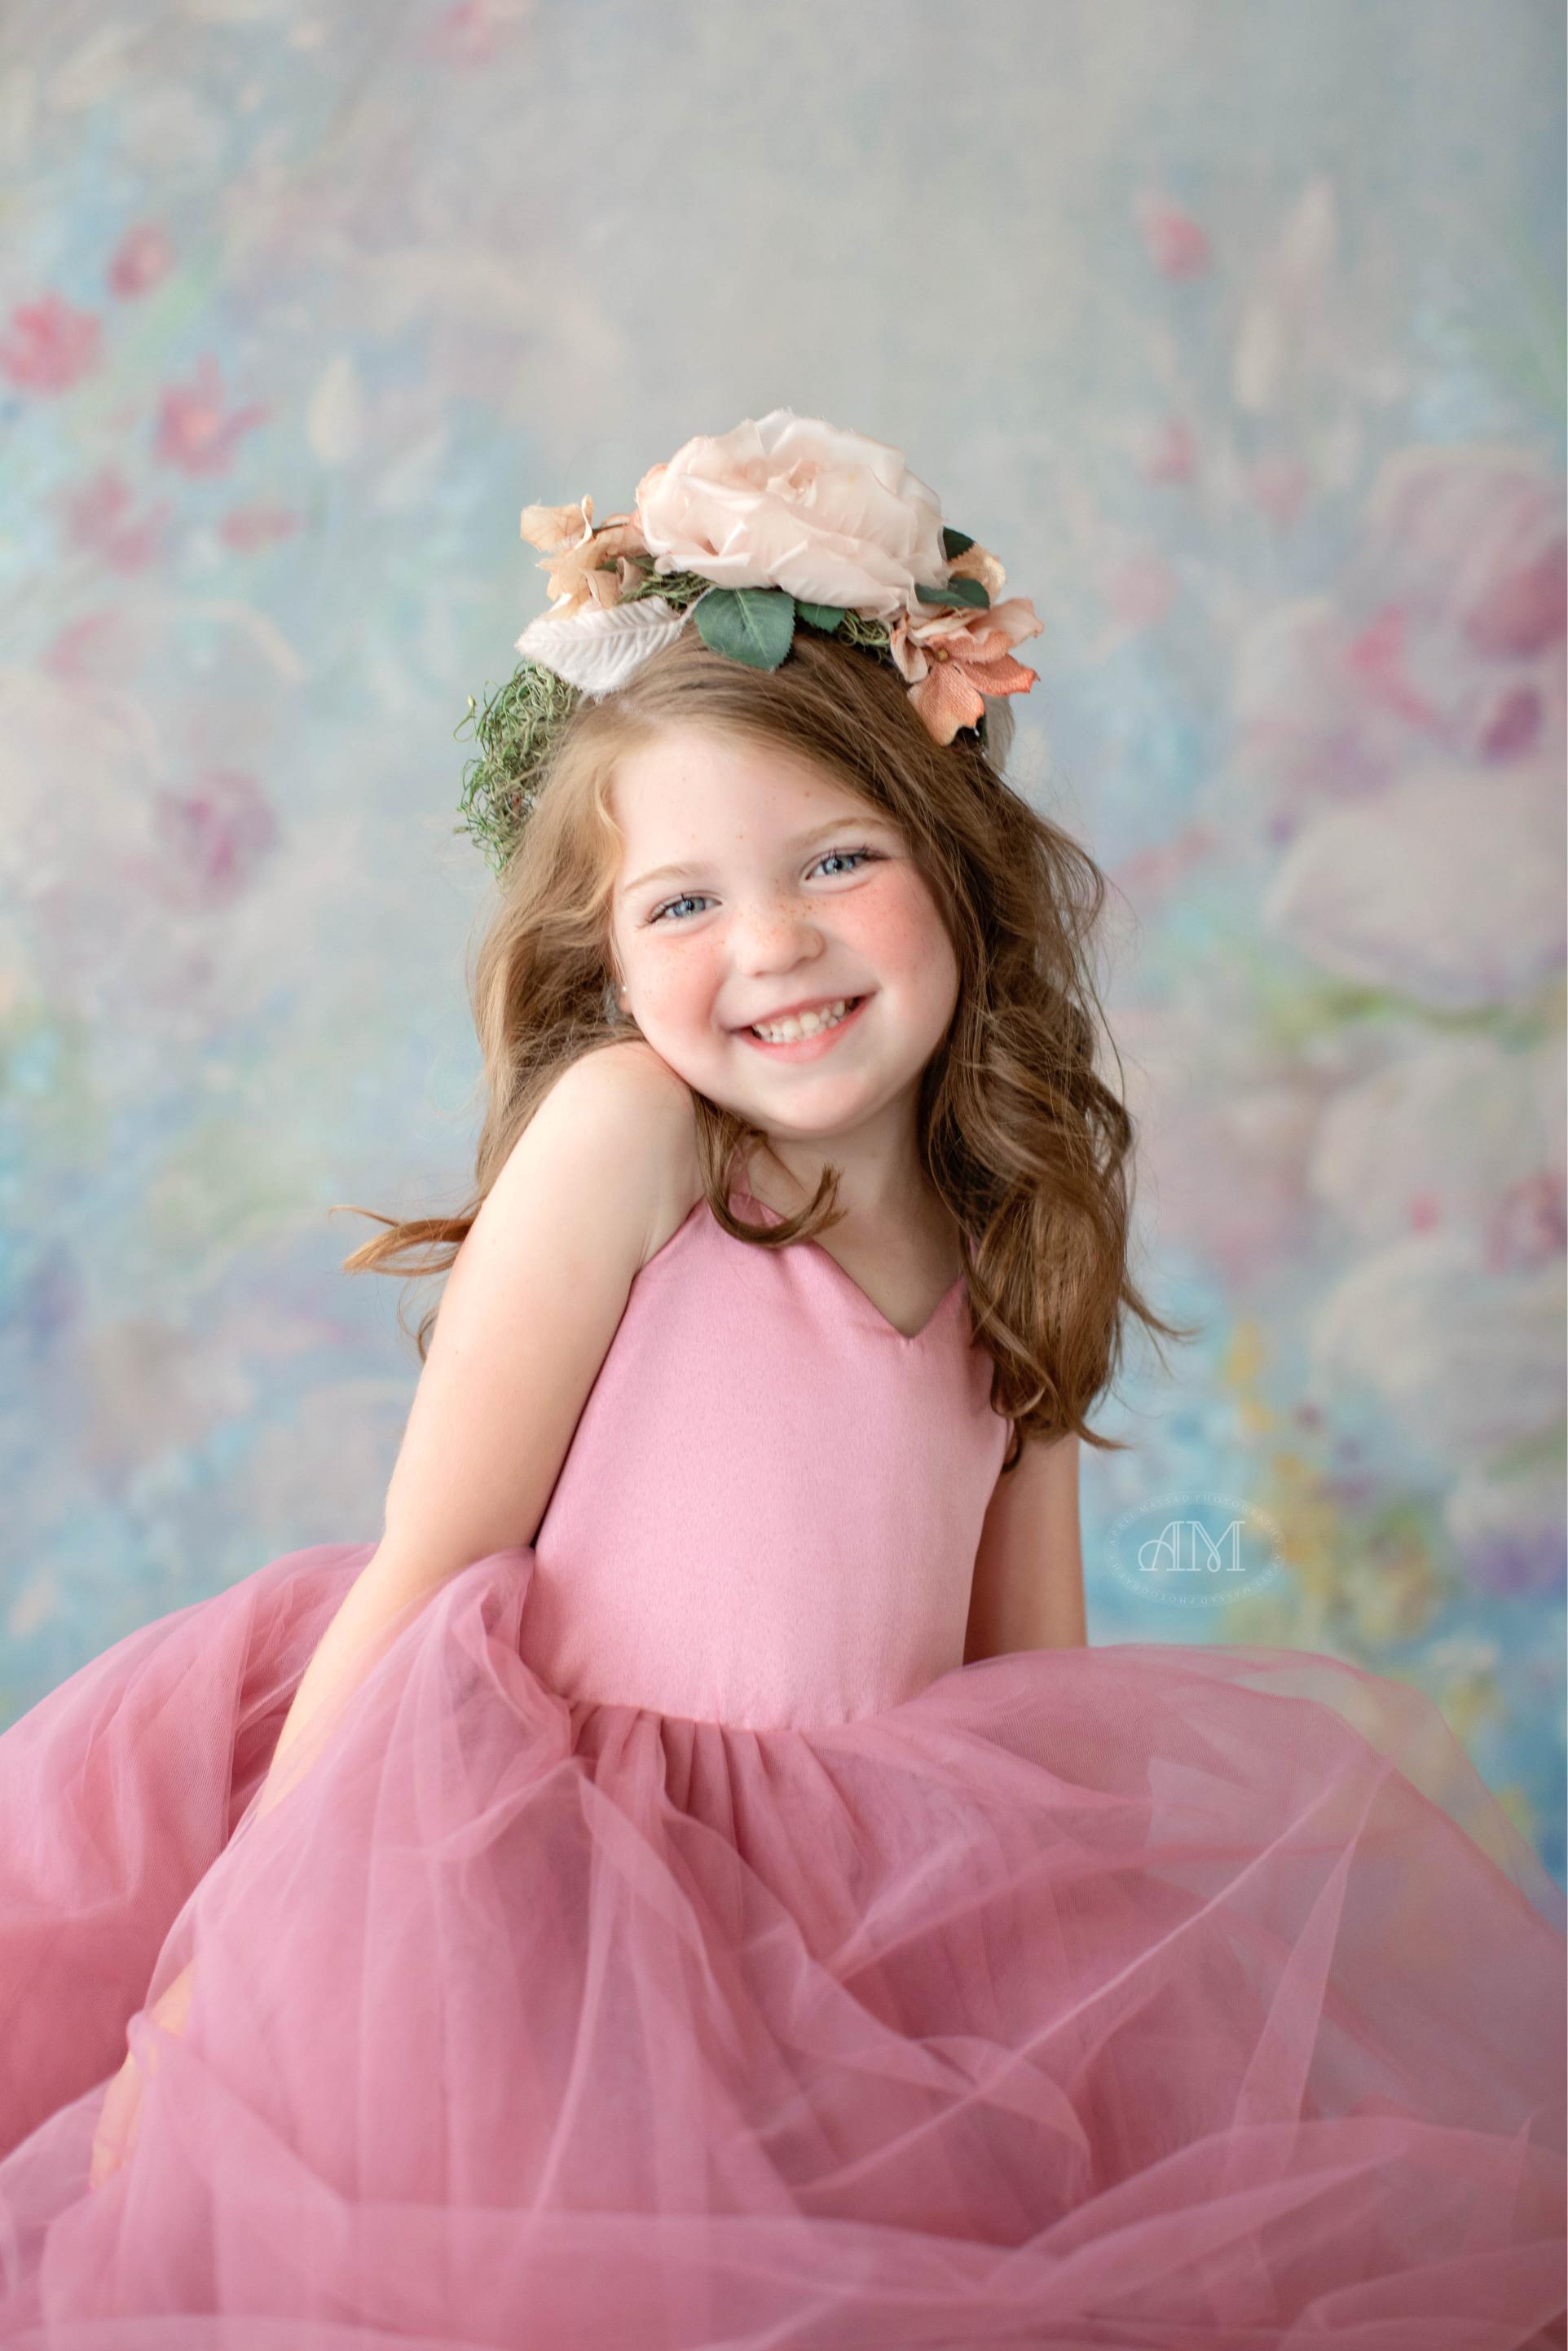 Chic and timeless flower girl dress, designed to complement the bride's vision.